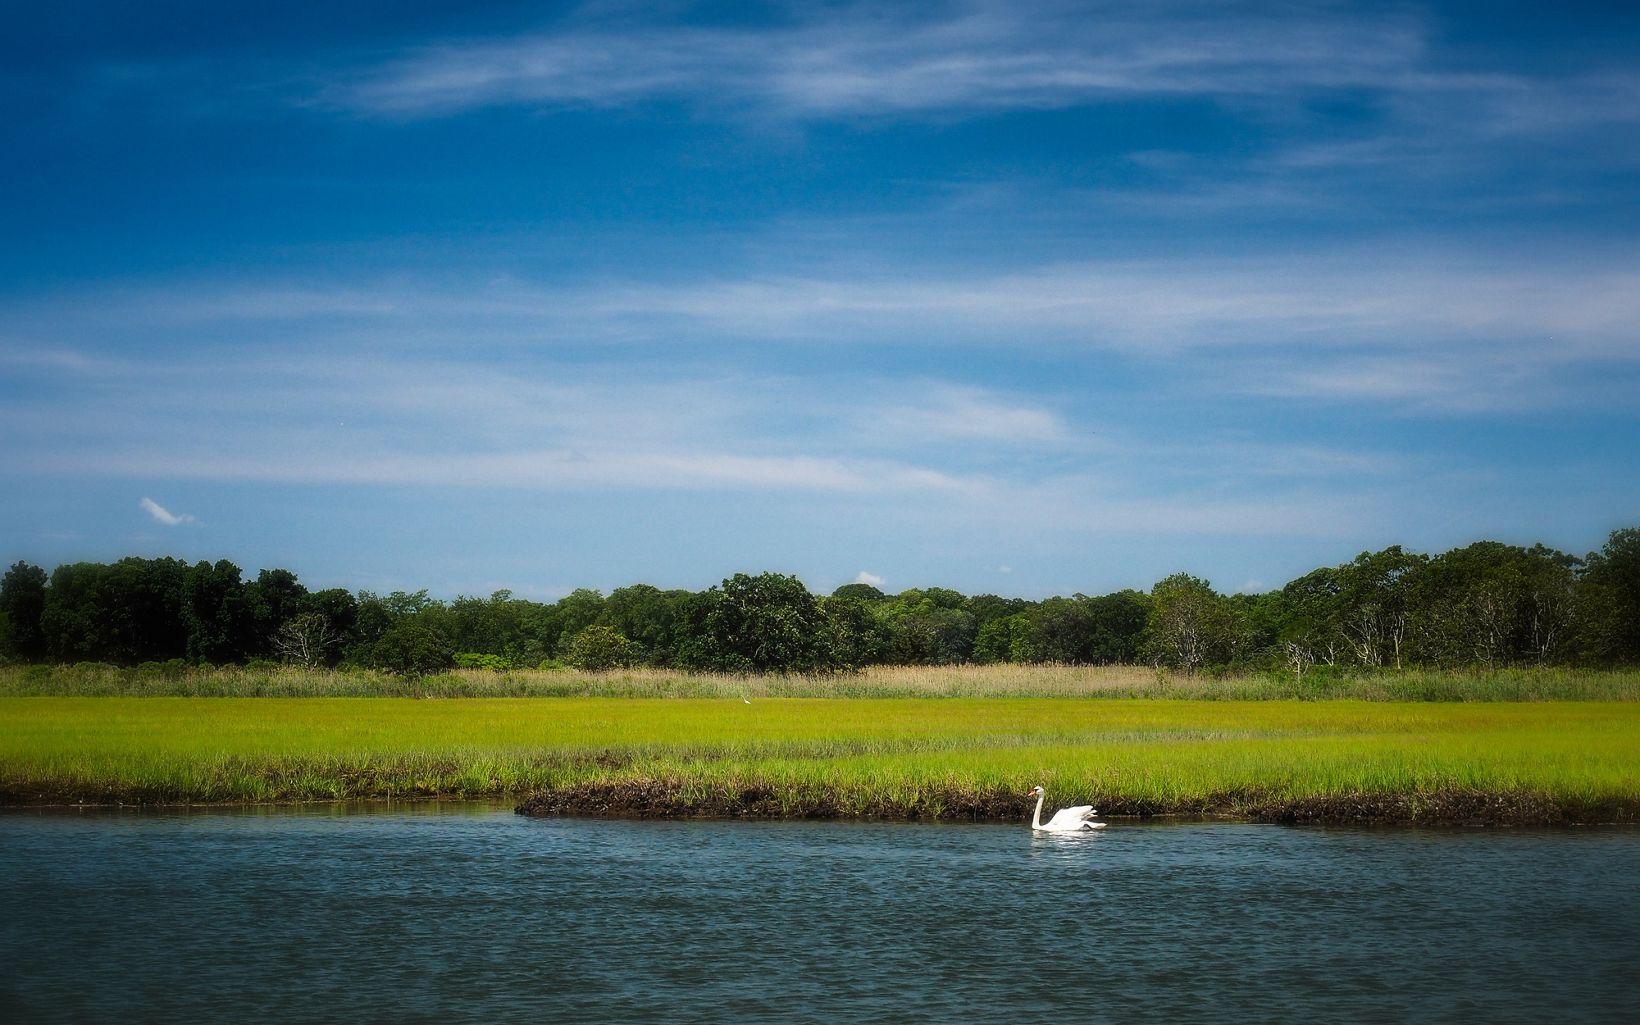 Stopping Point Scallop Pond Preserve is an important stopover point for migratory birds. © A. Graziano Photography